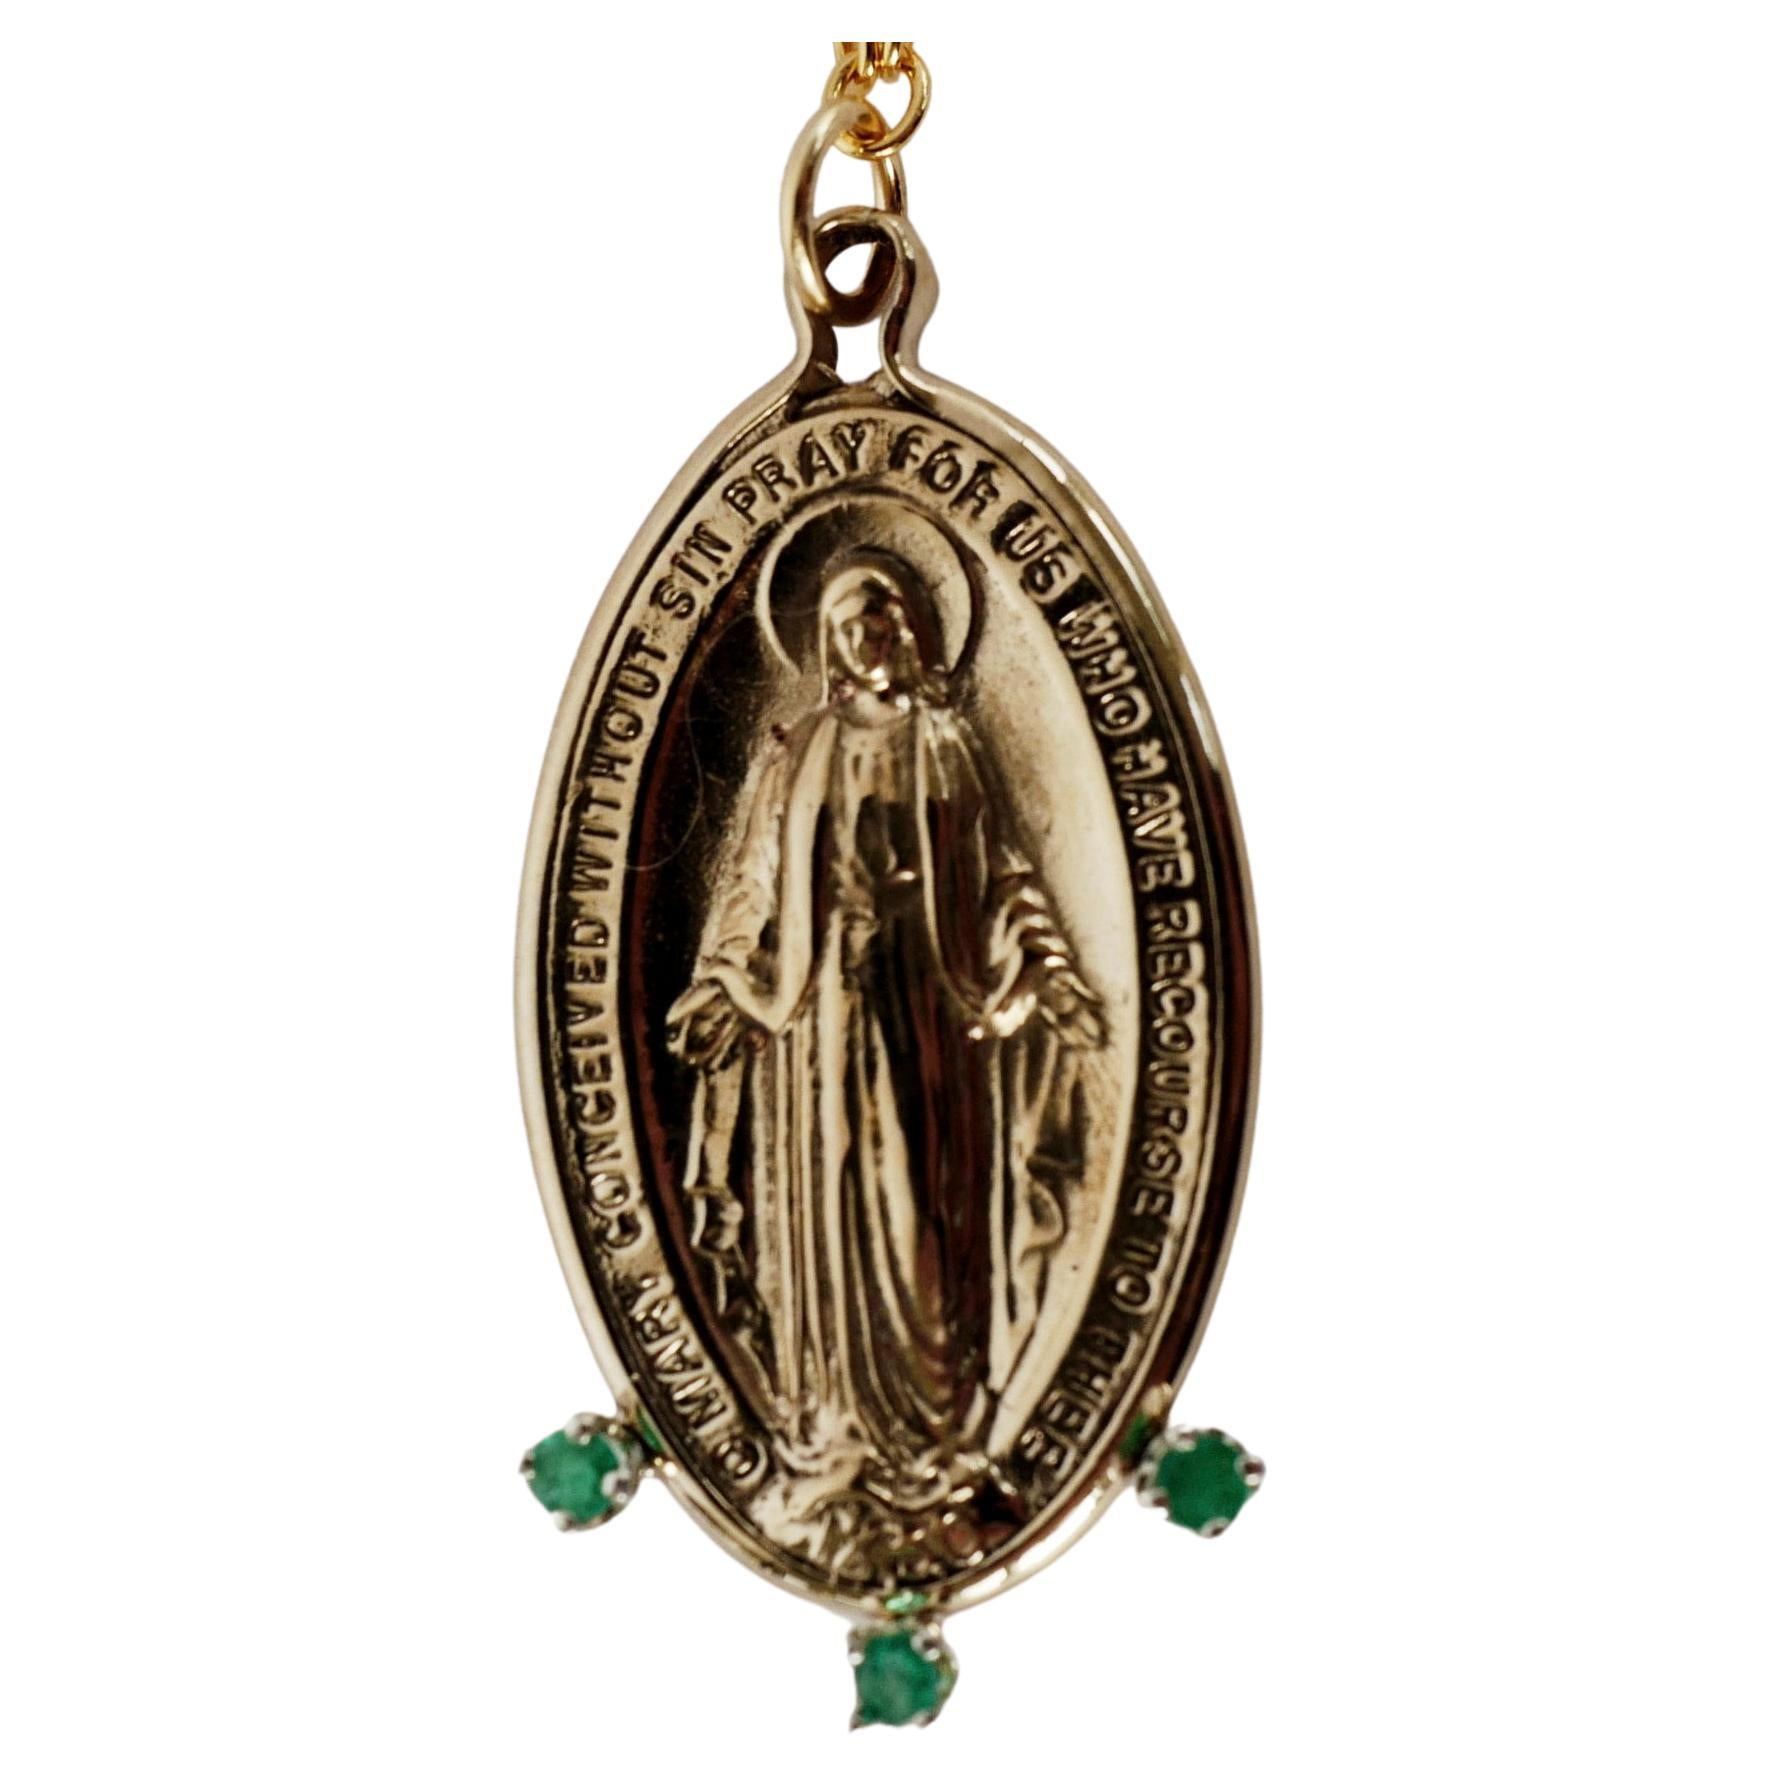 Emerald Virgin Mary Medal Chunky Chain Necklace Bronze Gold Filled J Dauphin